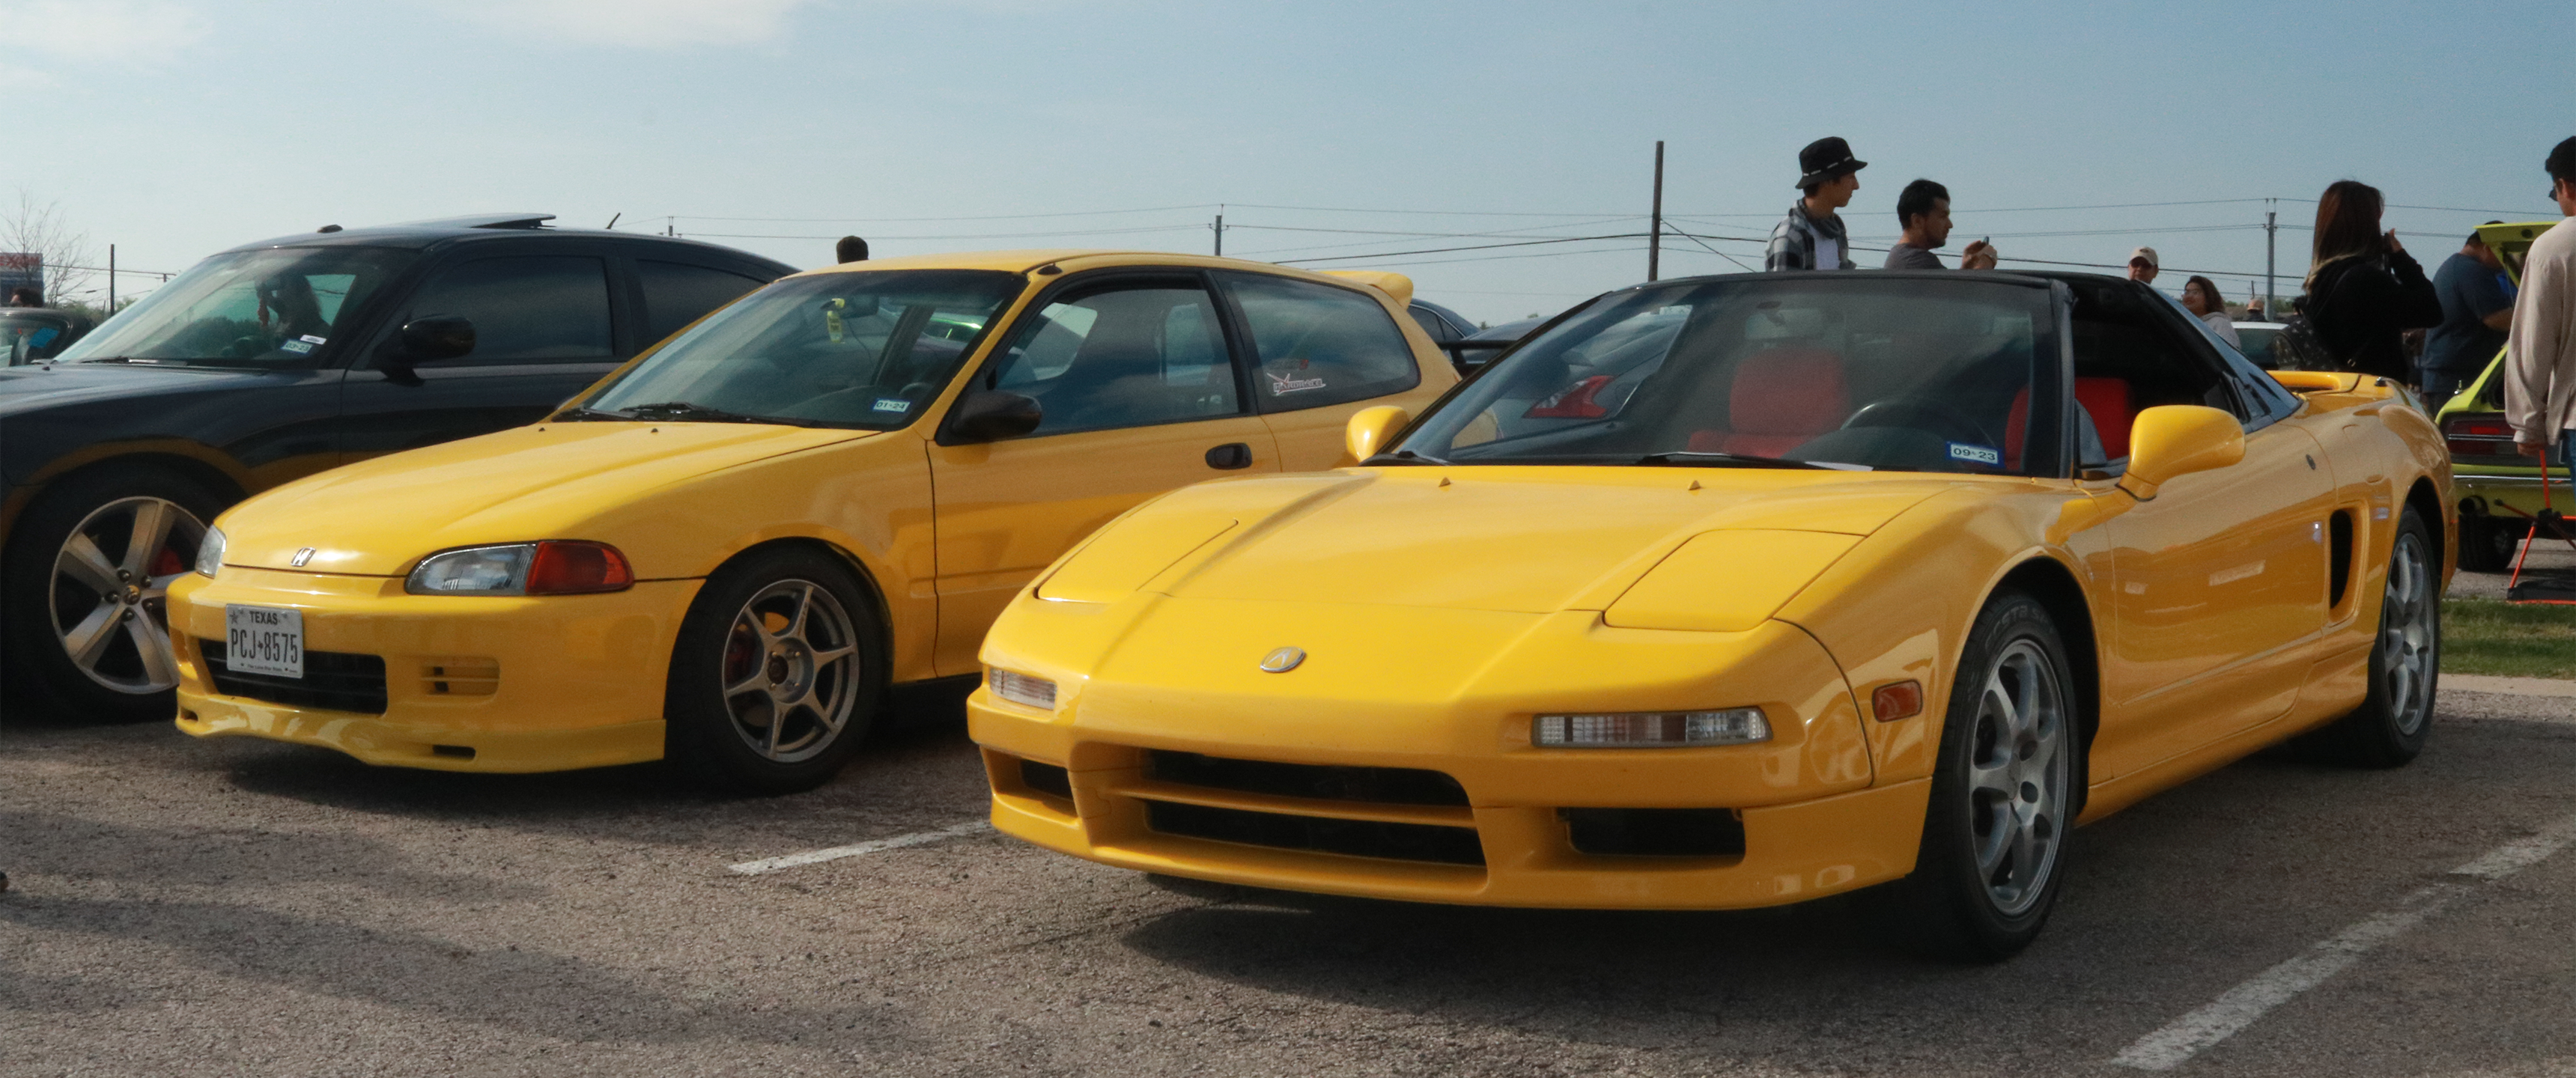 Car Stance Cars Acura Honda Yellow Cars Front Angle View 3440x1440